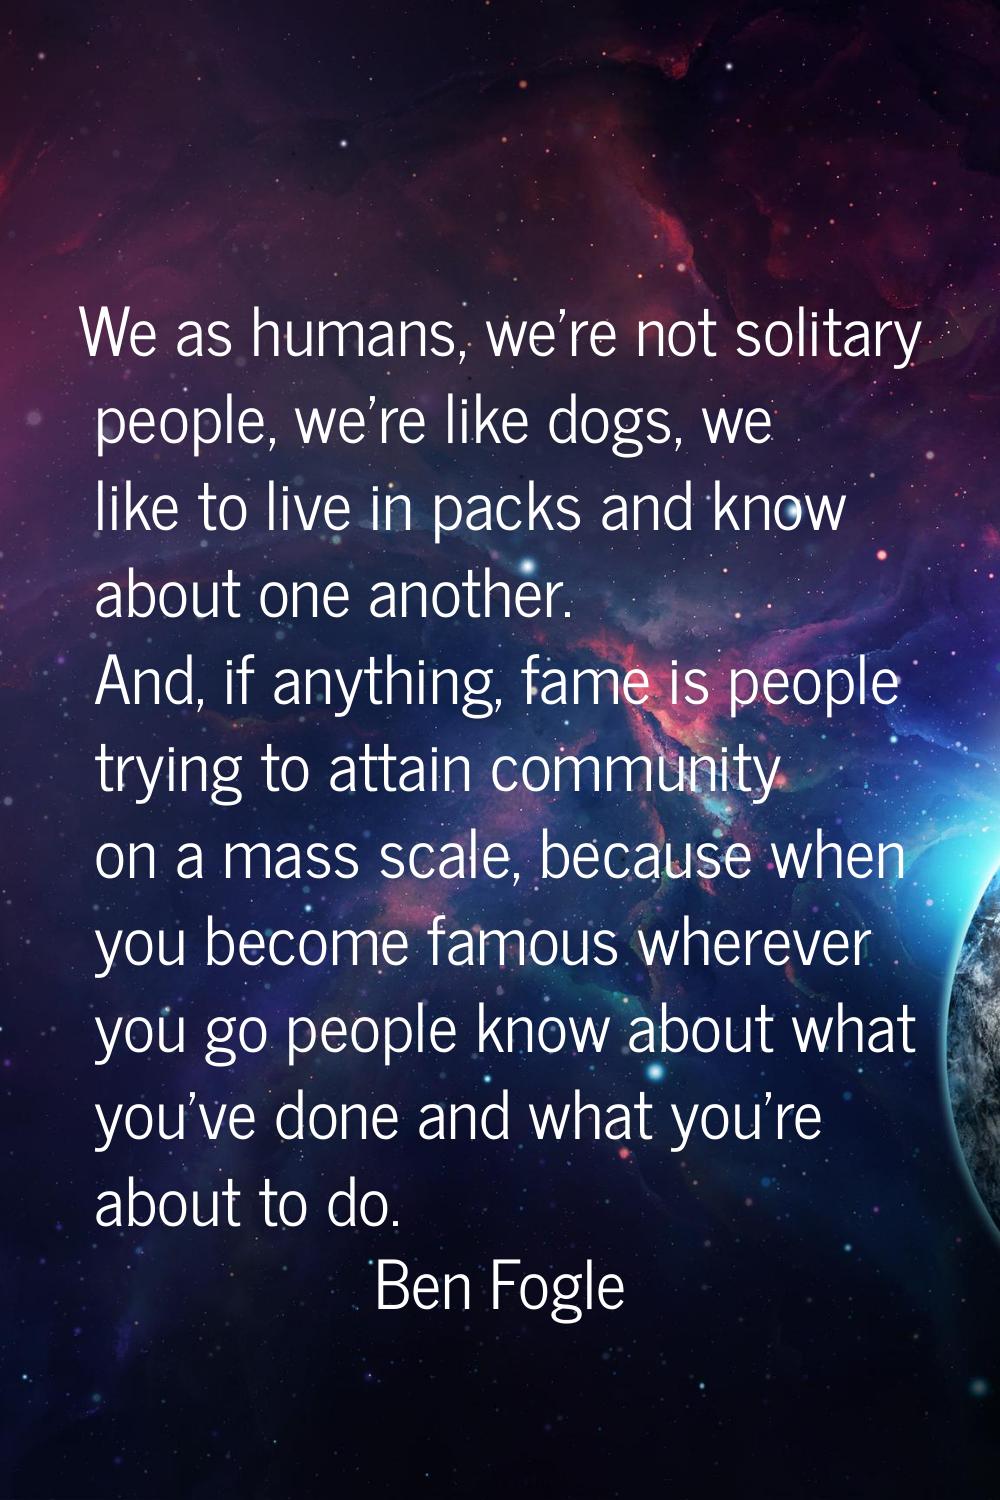 We as humans, we're not solitary people, we're like dogs, we like to live in packs and know about o